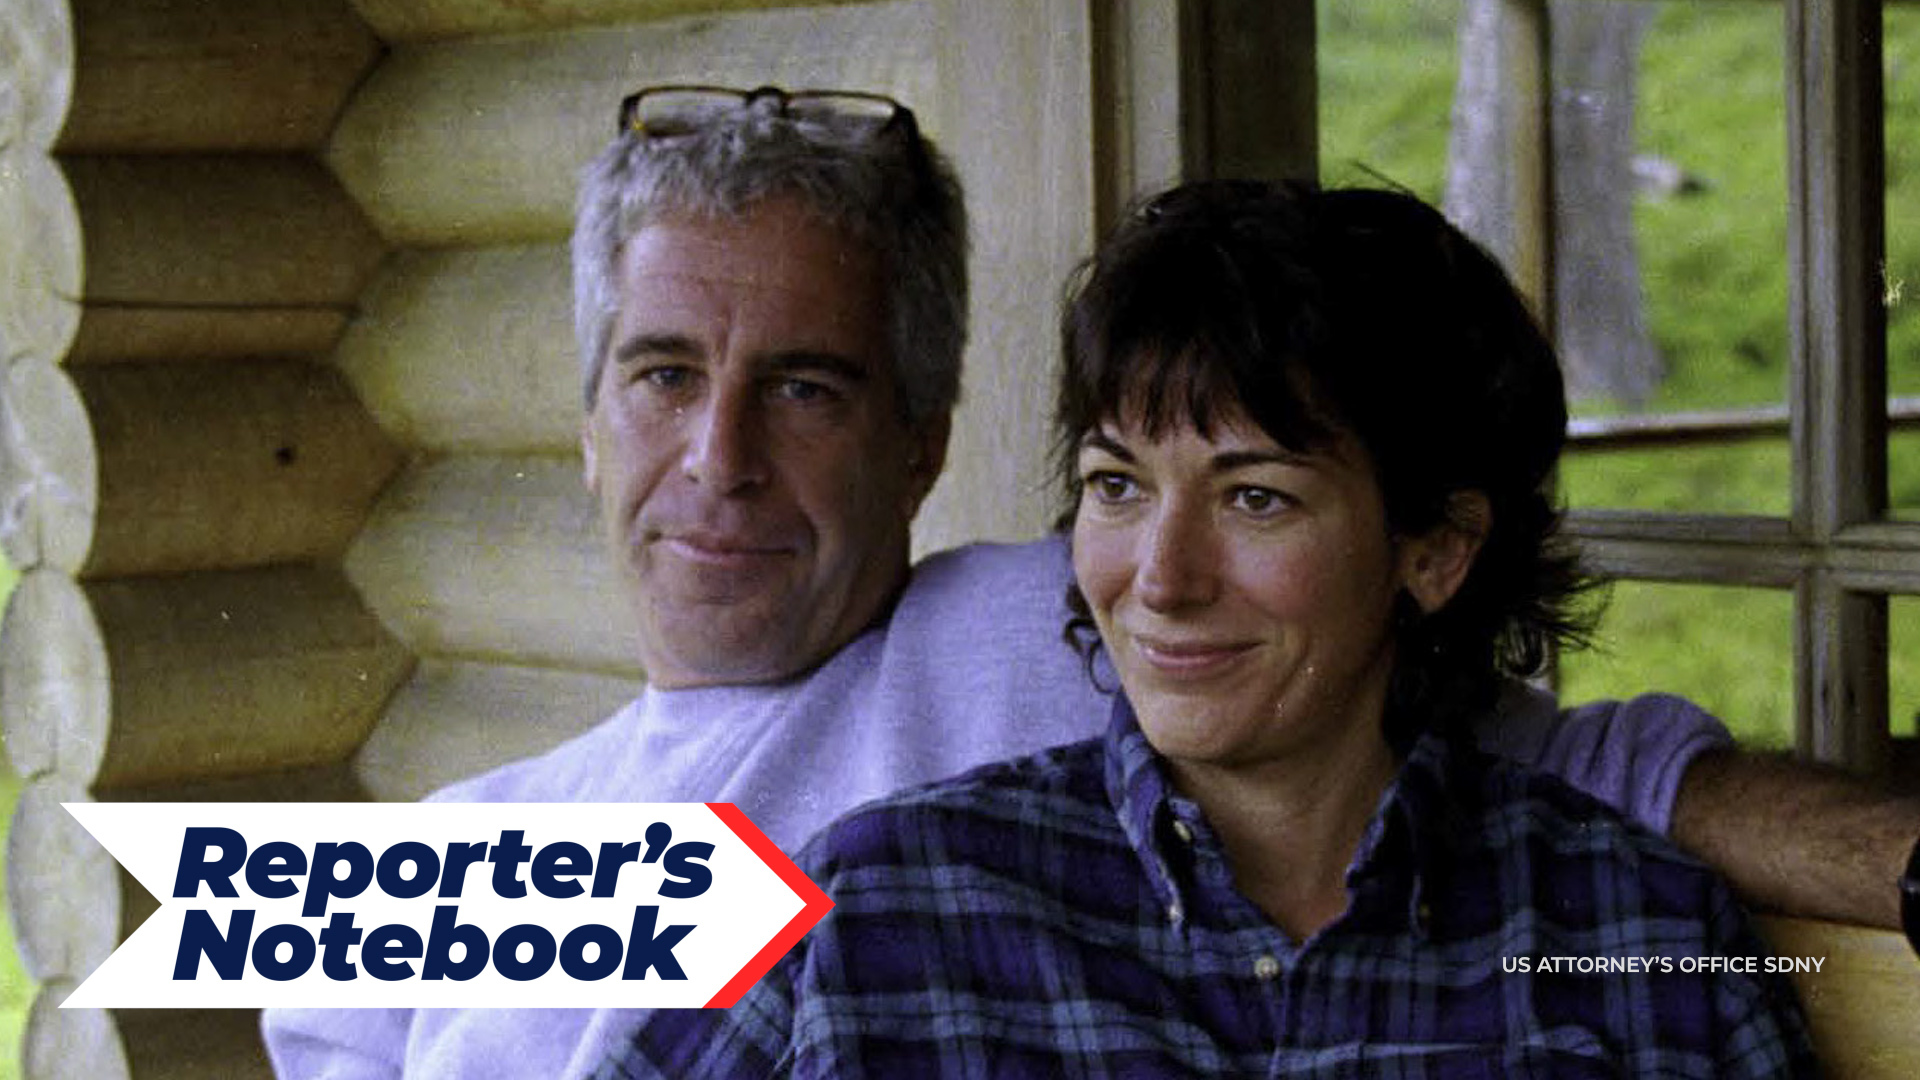 Photos revealed in Ghislaine Maxwell's trial have illustrated her intimate relationship with Jeffrey Epstein, who committed suicide in 2019.